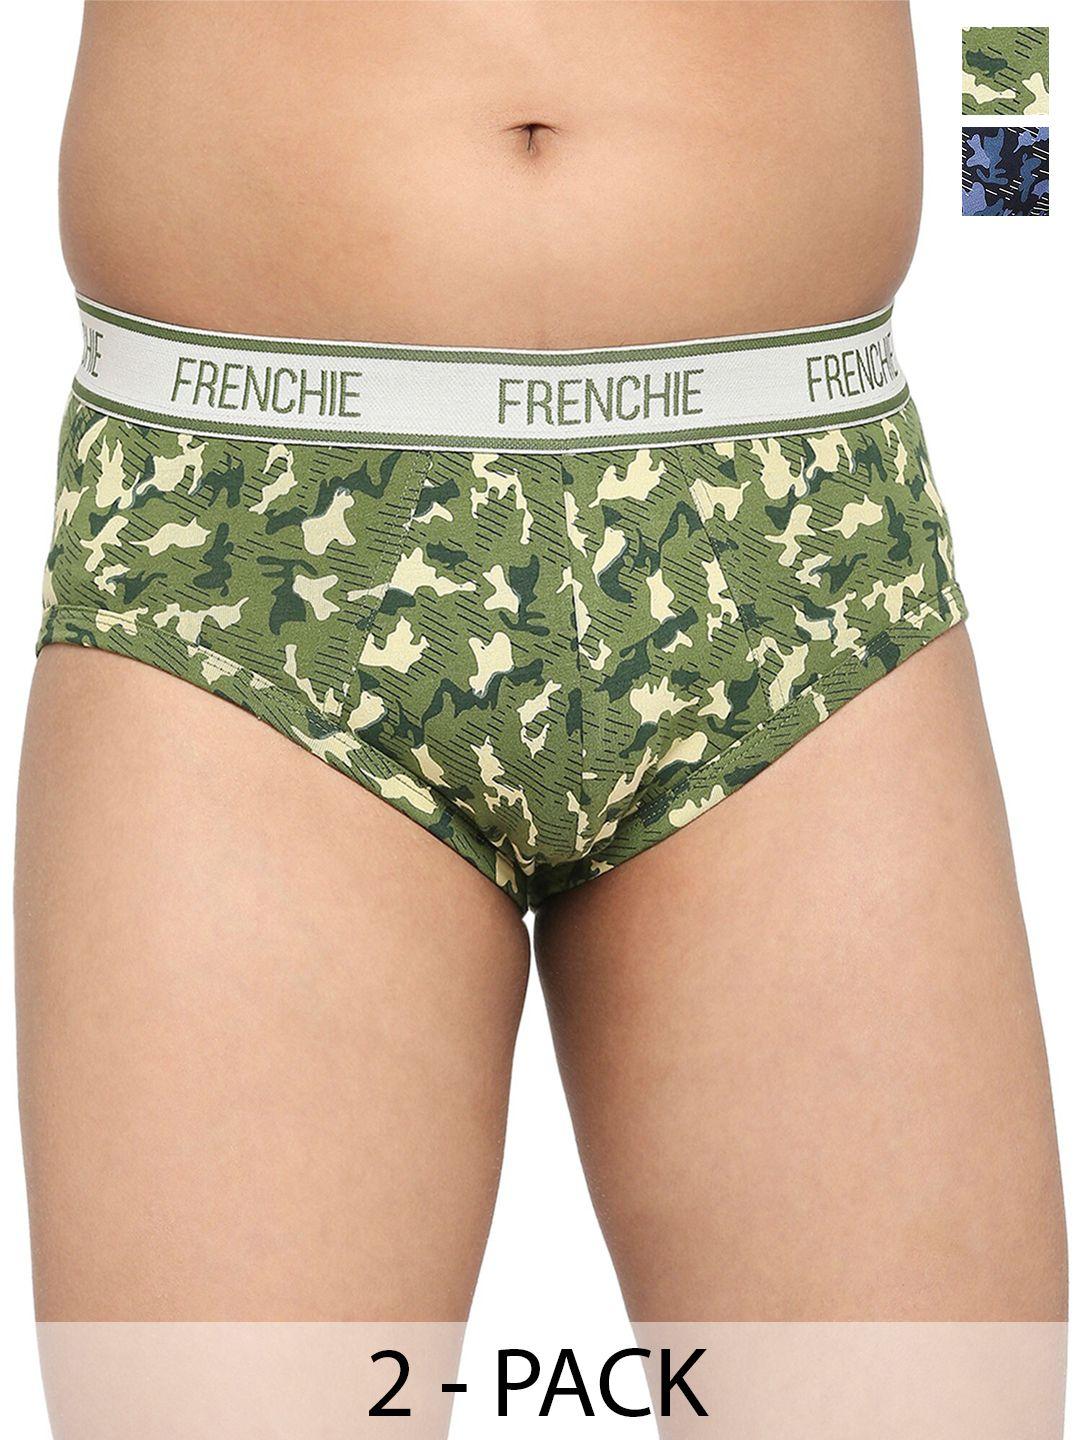 frenchie-boys-pack-of-2-abstract-printed-mid-rise-cotton-basic-briefs-fr-bf-u1904-1x5